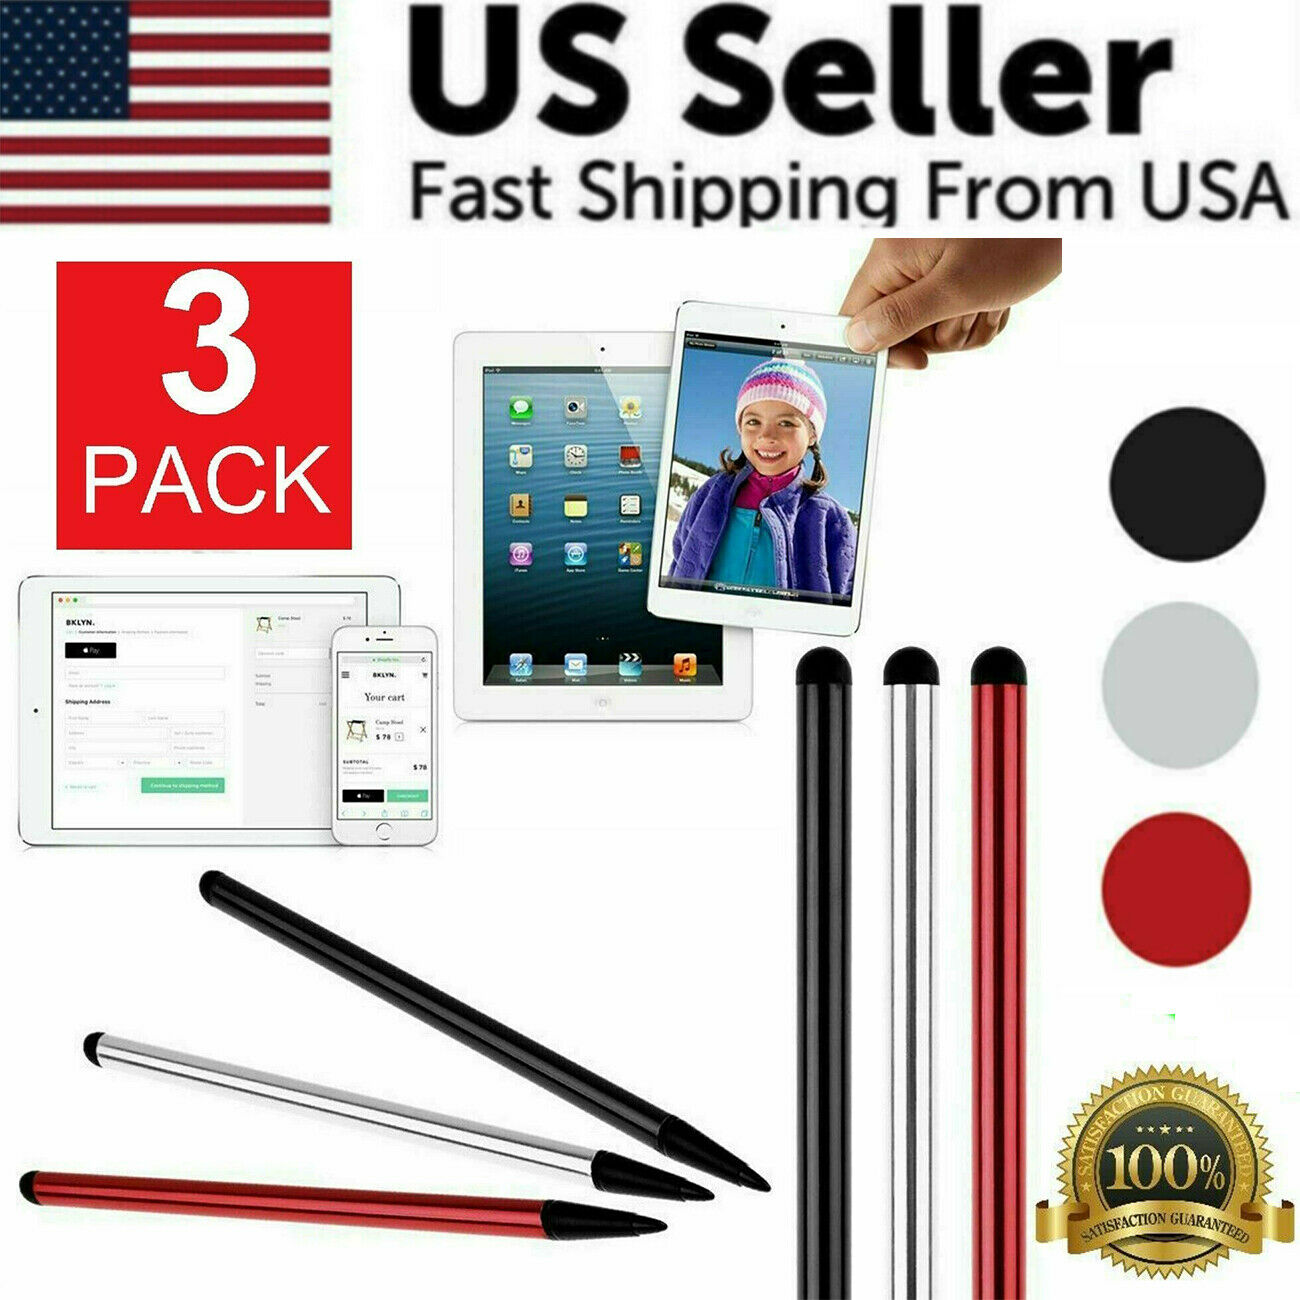 2 In 1 Touch Screen Pen Stylus Universal For Iphone Ipad Samsung Tablet Phone Pc